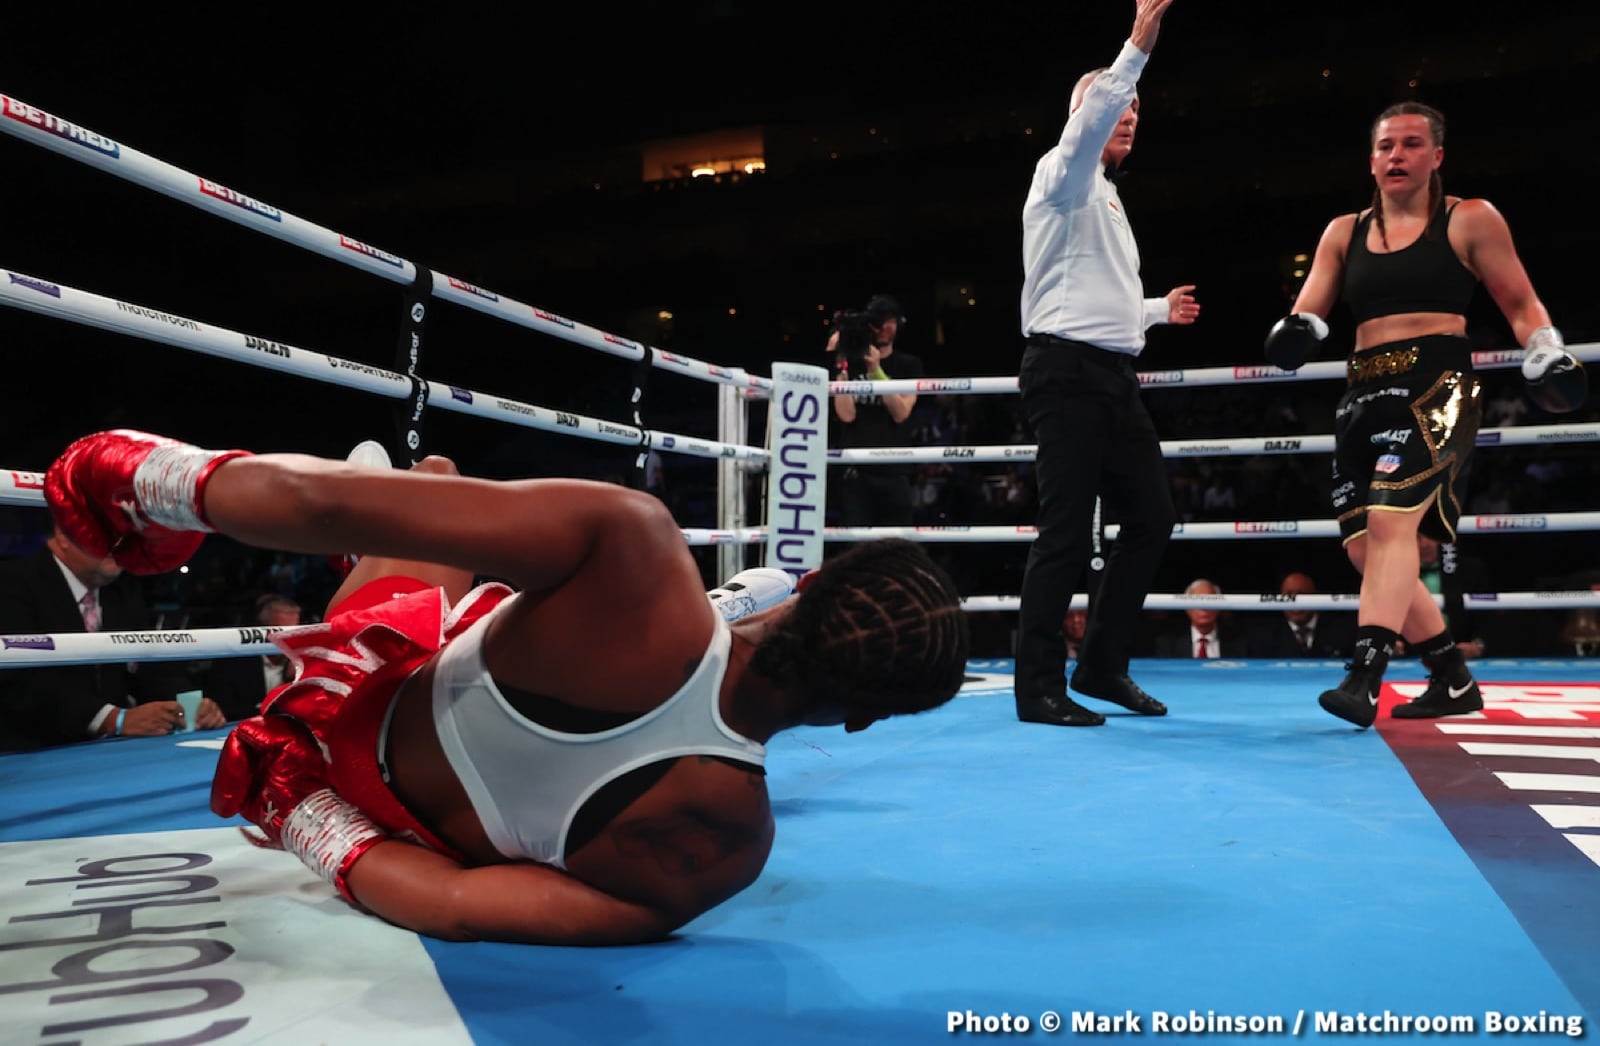 Image: Boxing Results: Chantelle Cameron Defeats Mary McGee for Unification Win!